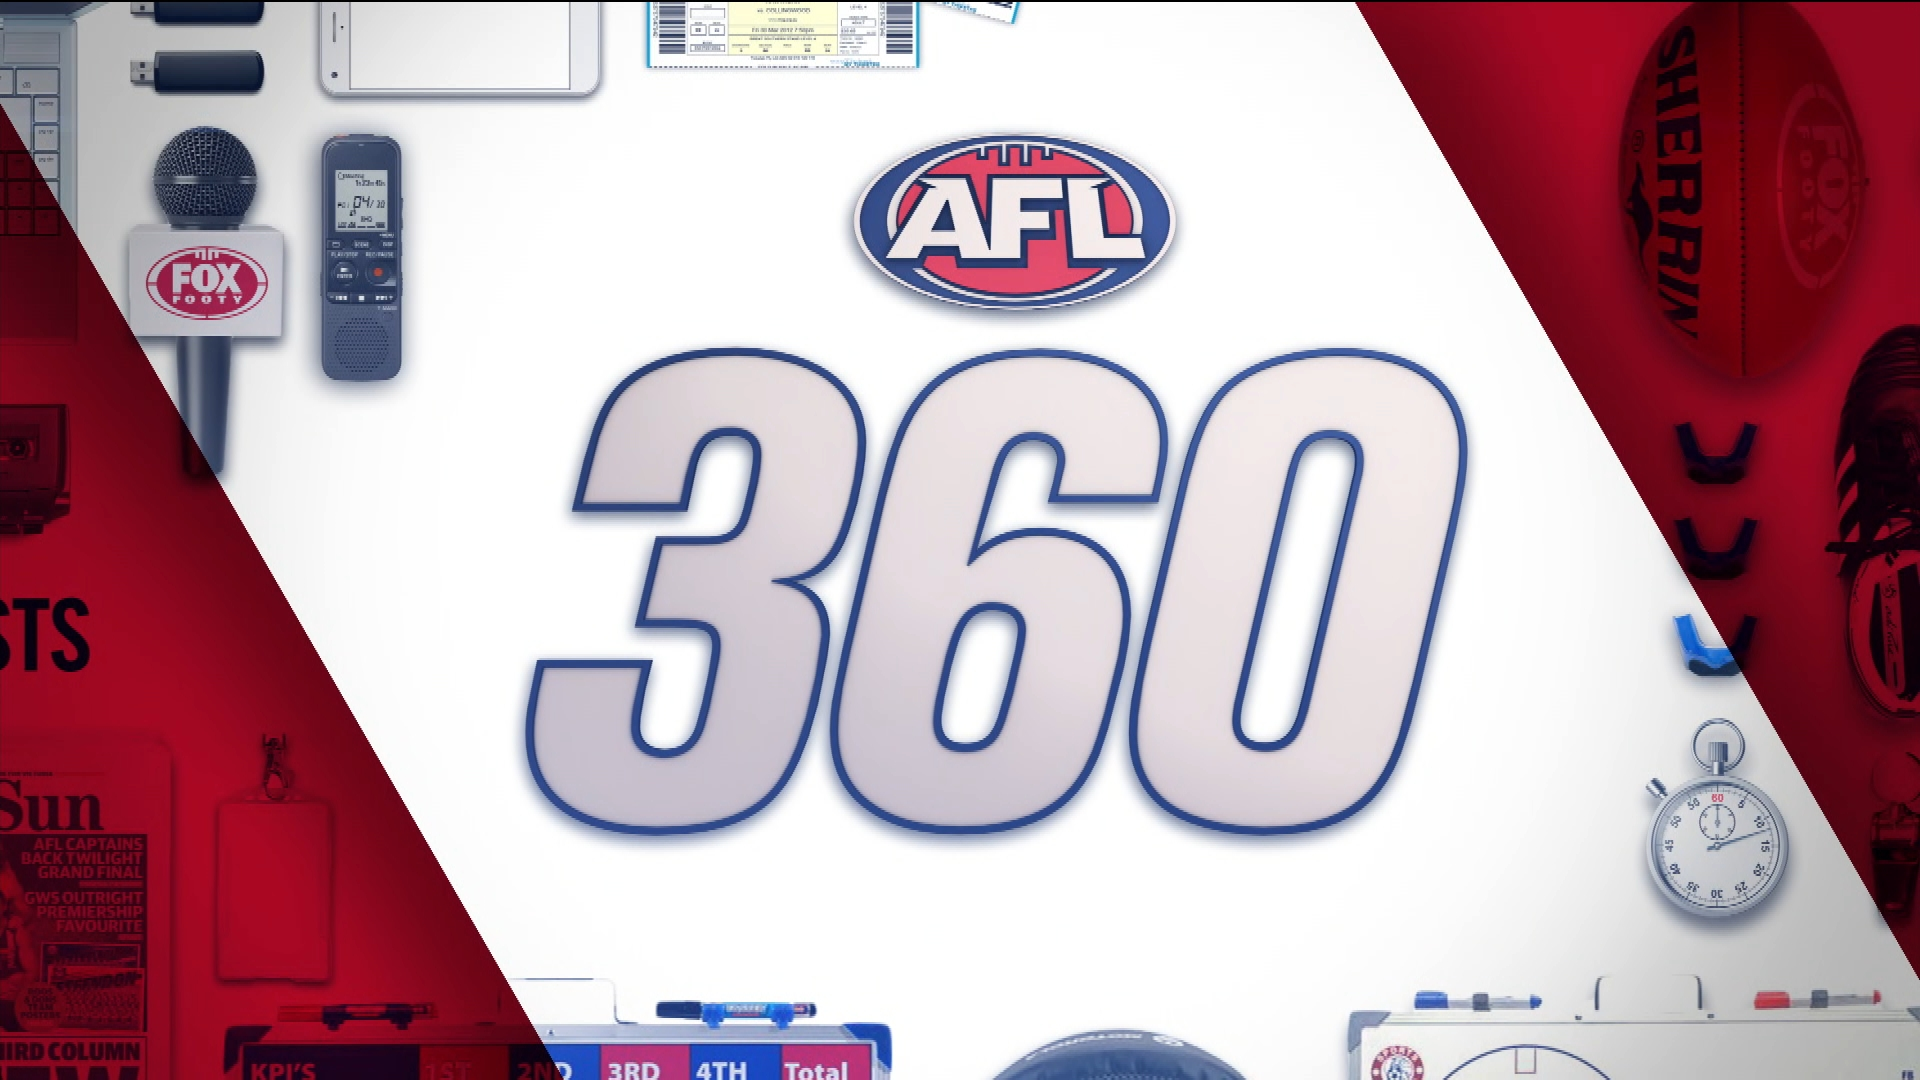 AFL 360 - Dees and Dogs set for titanic Grand Final tussle & Cats too old, while the Power choked? - 13/09/21